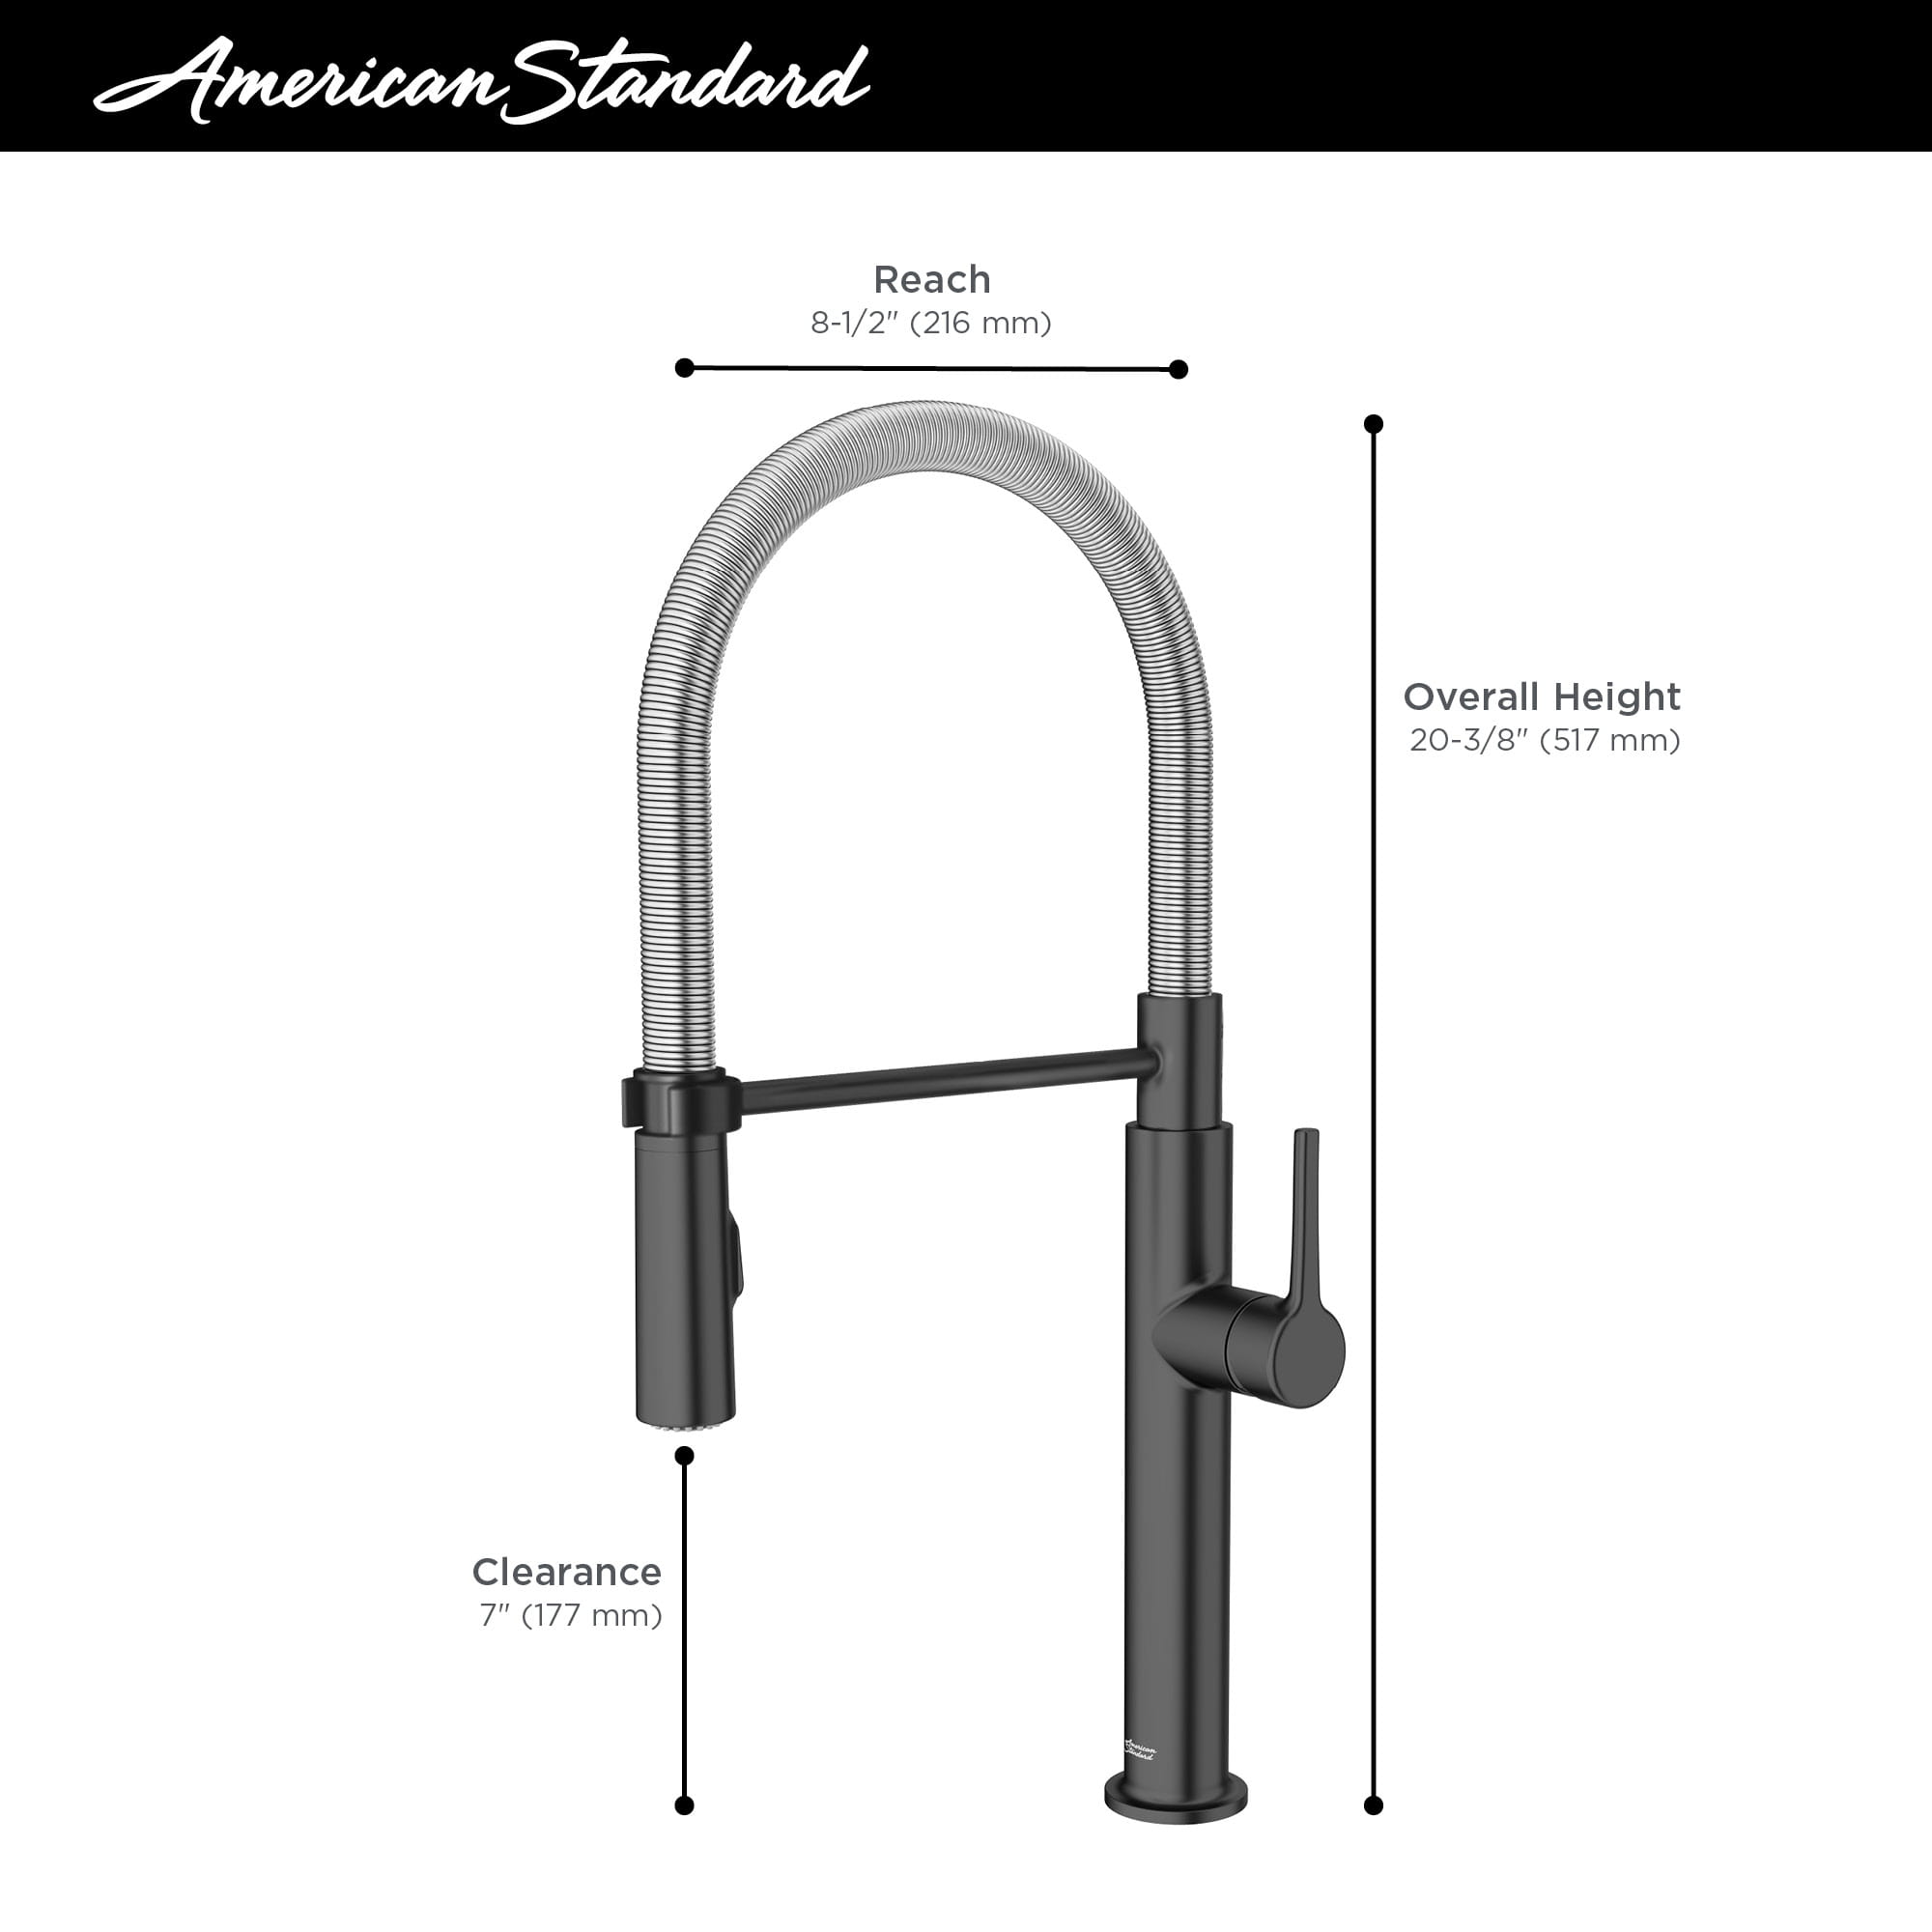 Studio® S Semi-Pro Pull-Down Dual Spray Kitchen Faucet With Spring Spout